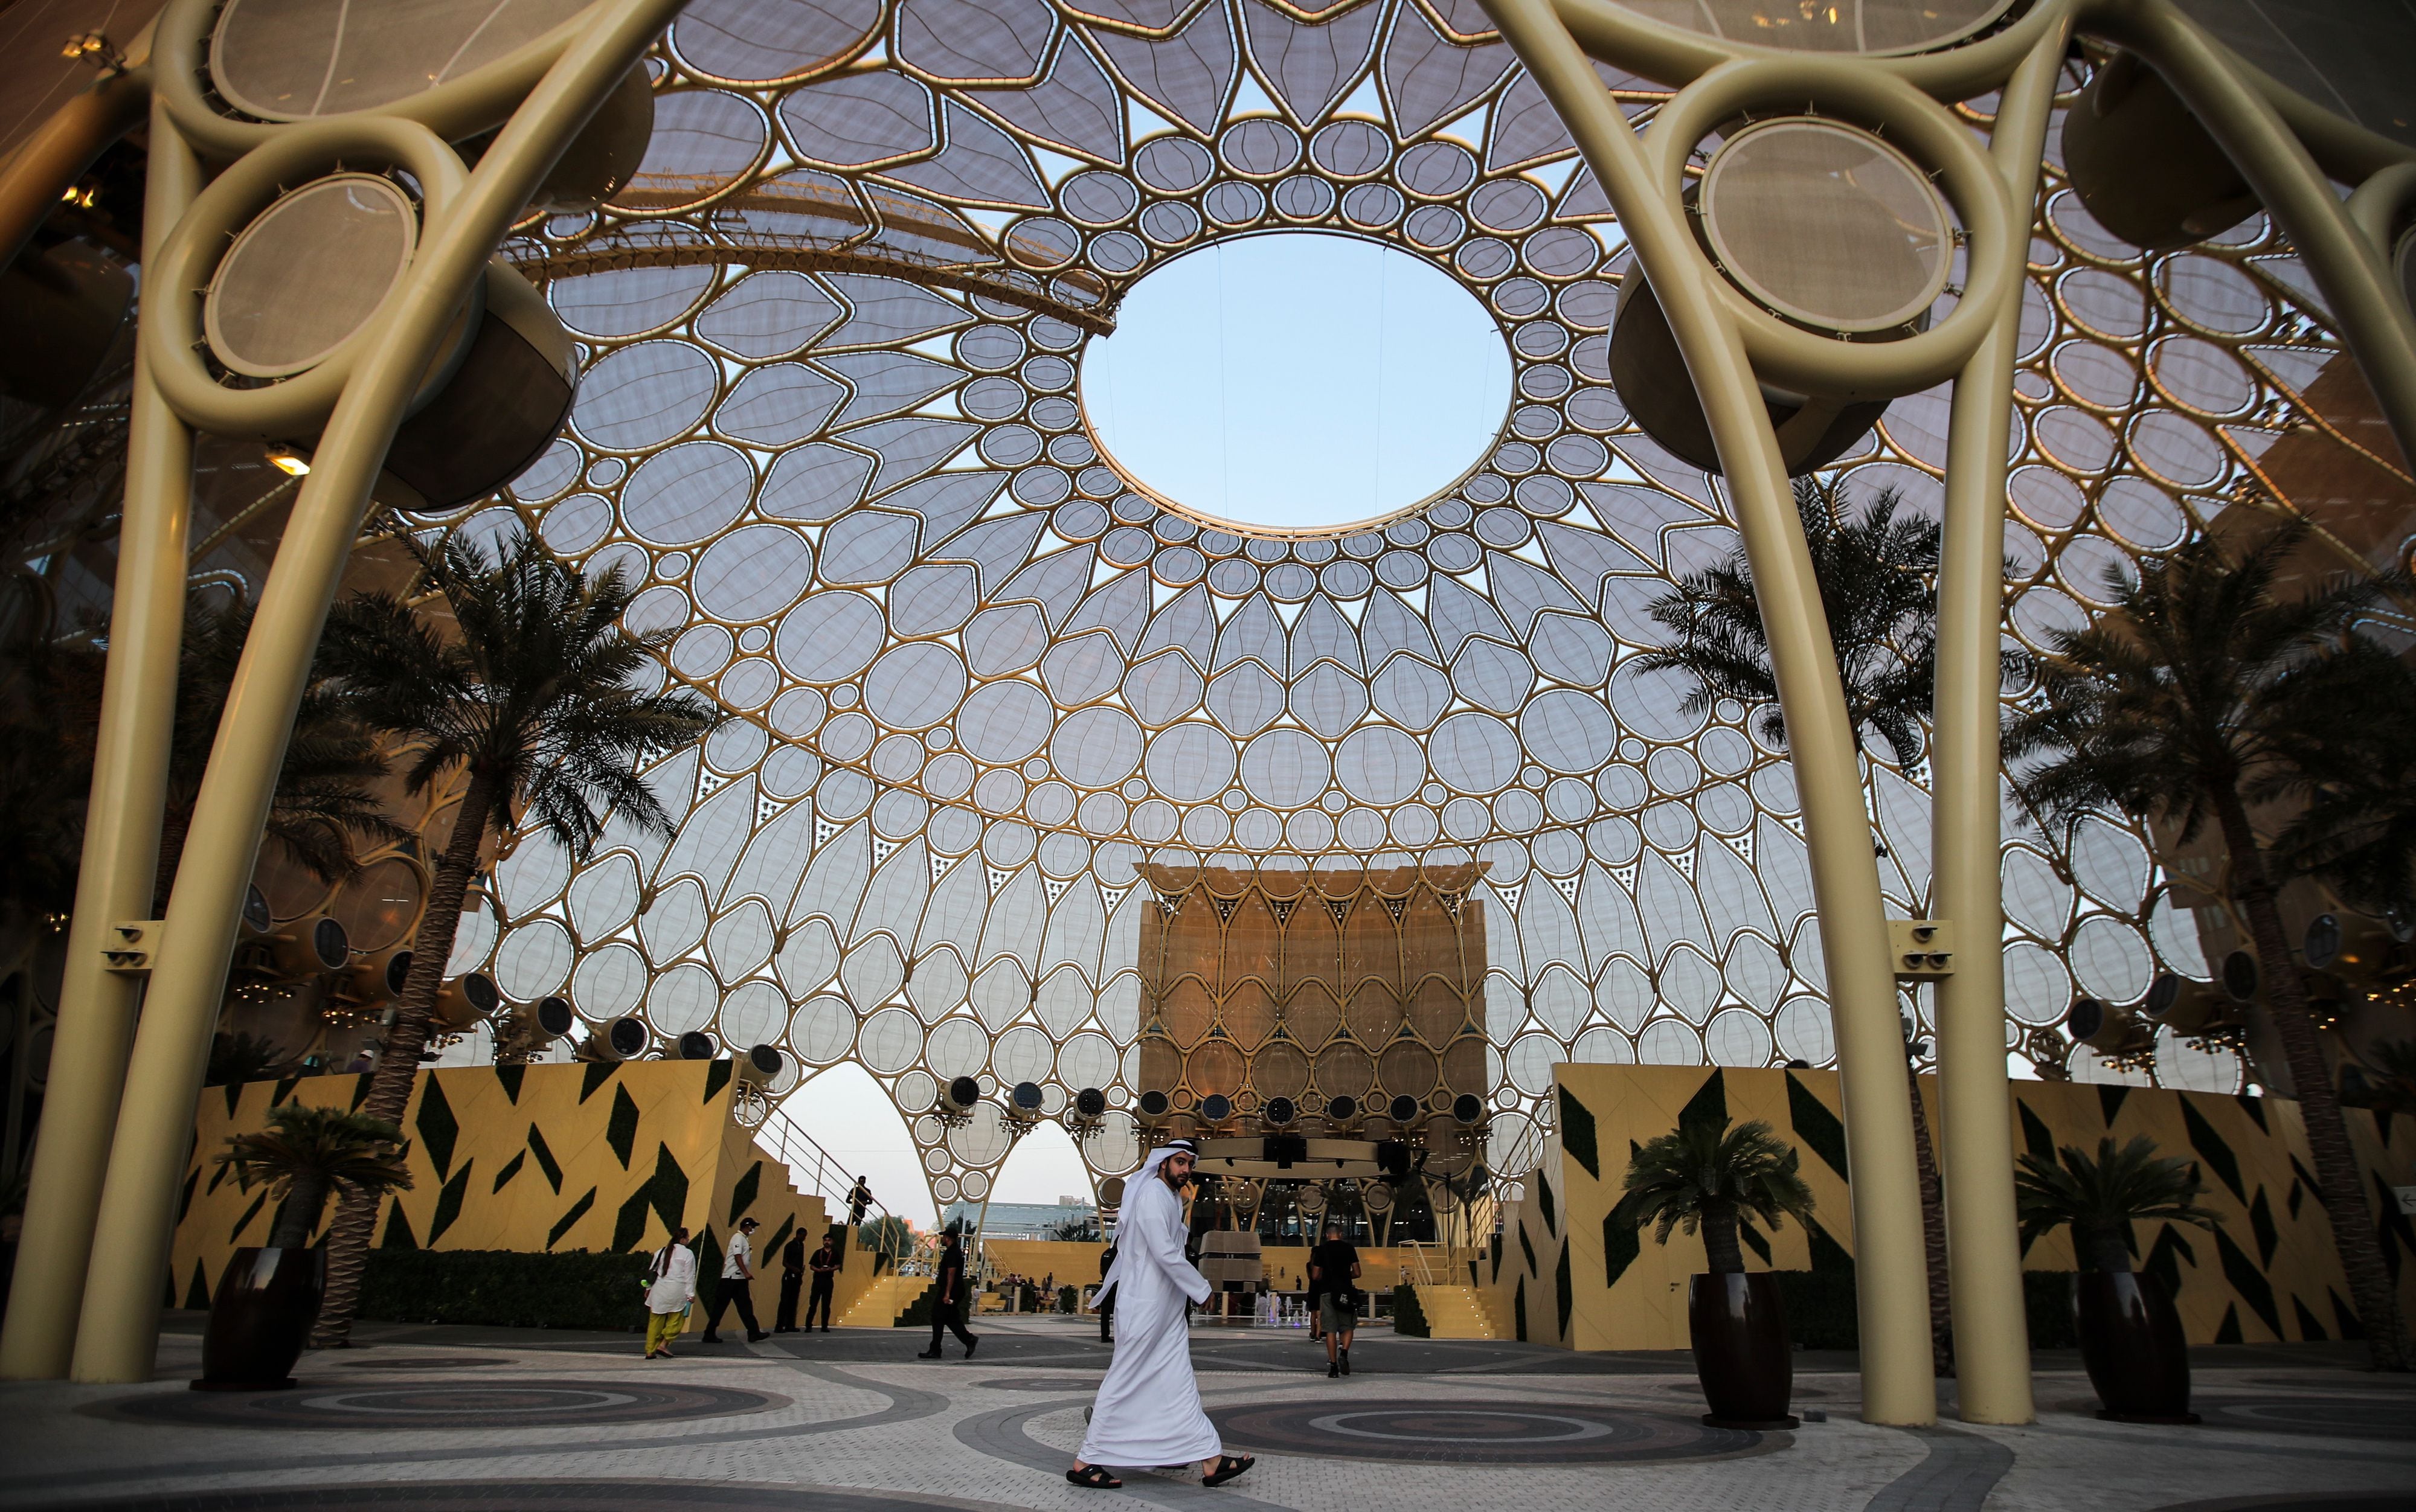 Expo 2020 Dubai expected to add $42bn to UAE economy until 2042